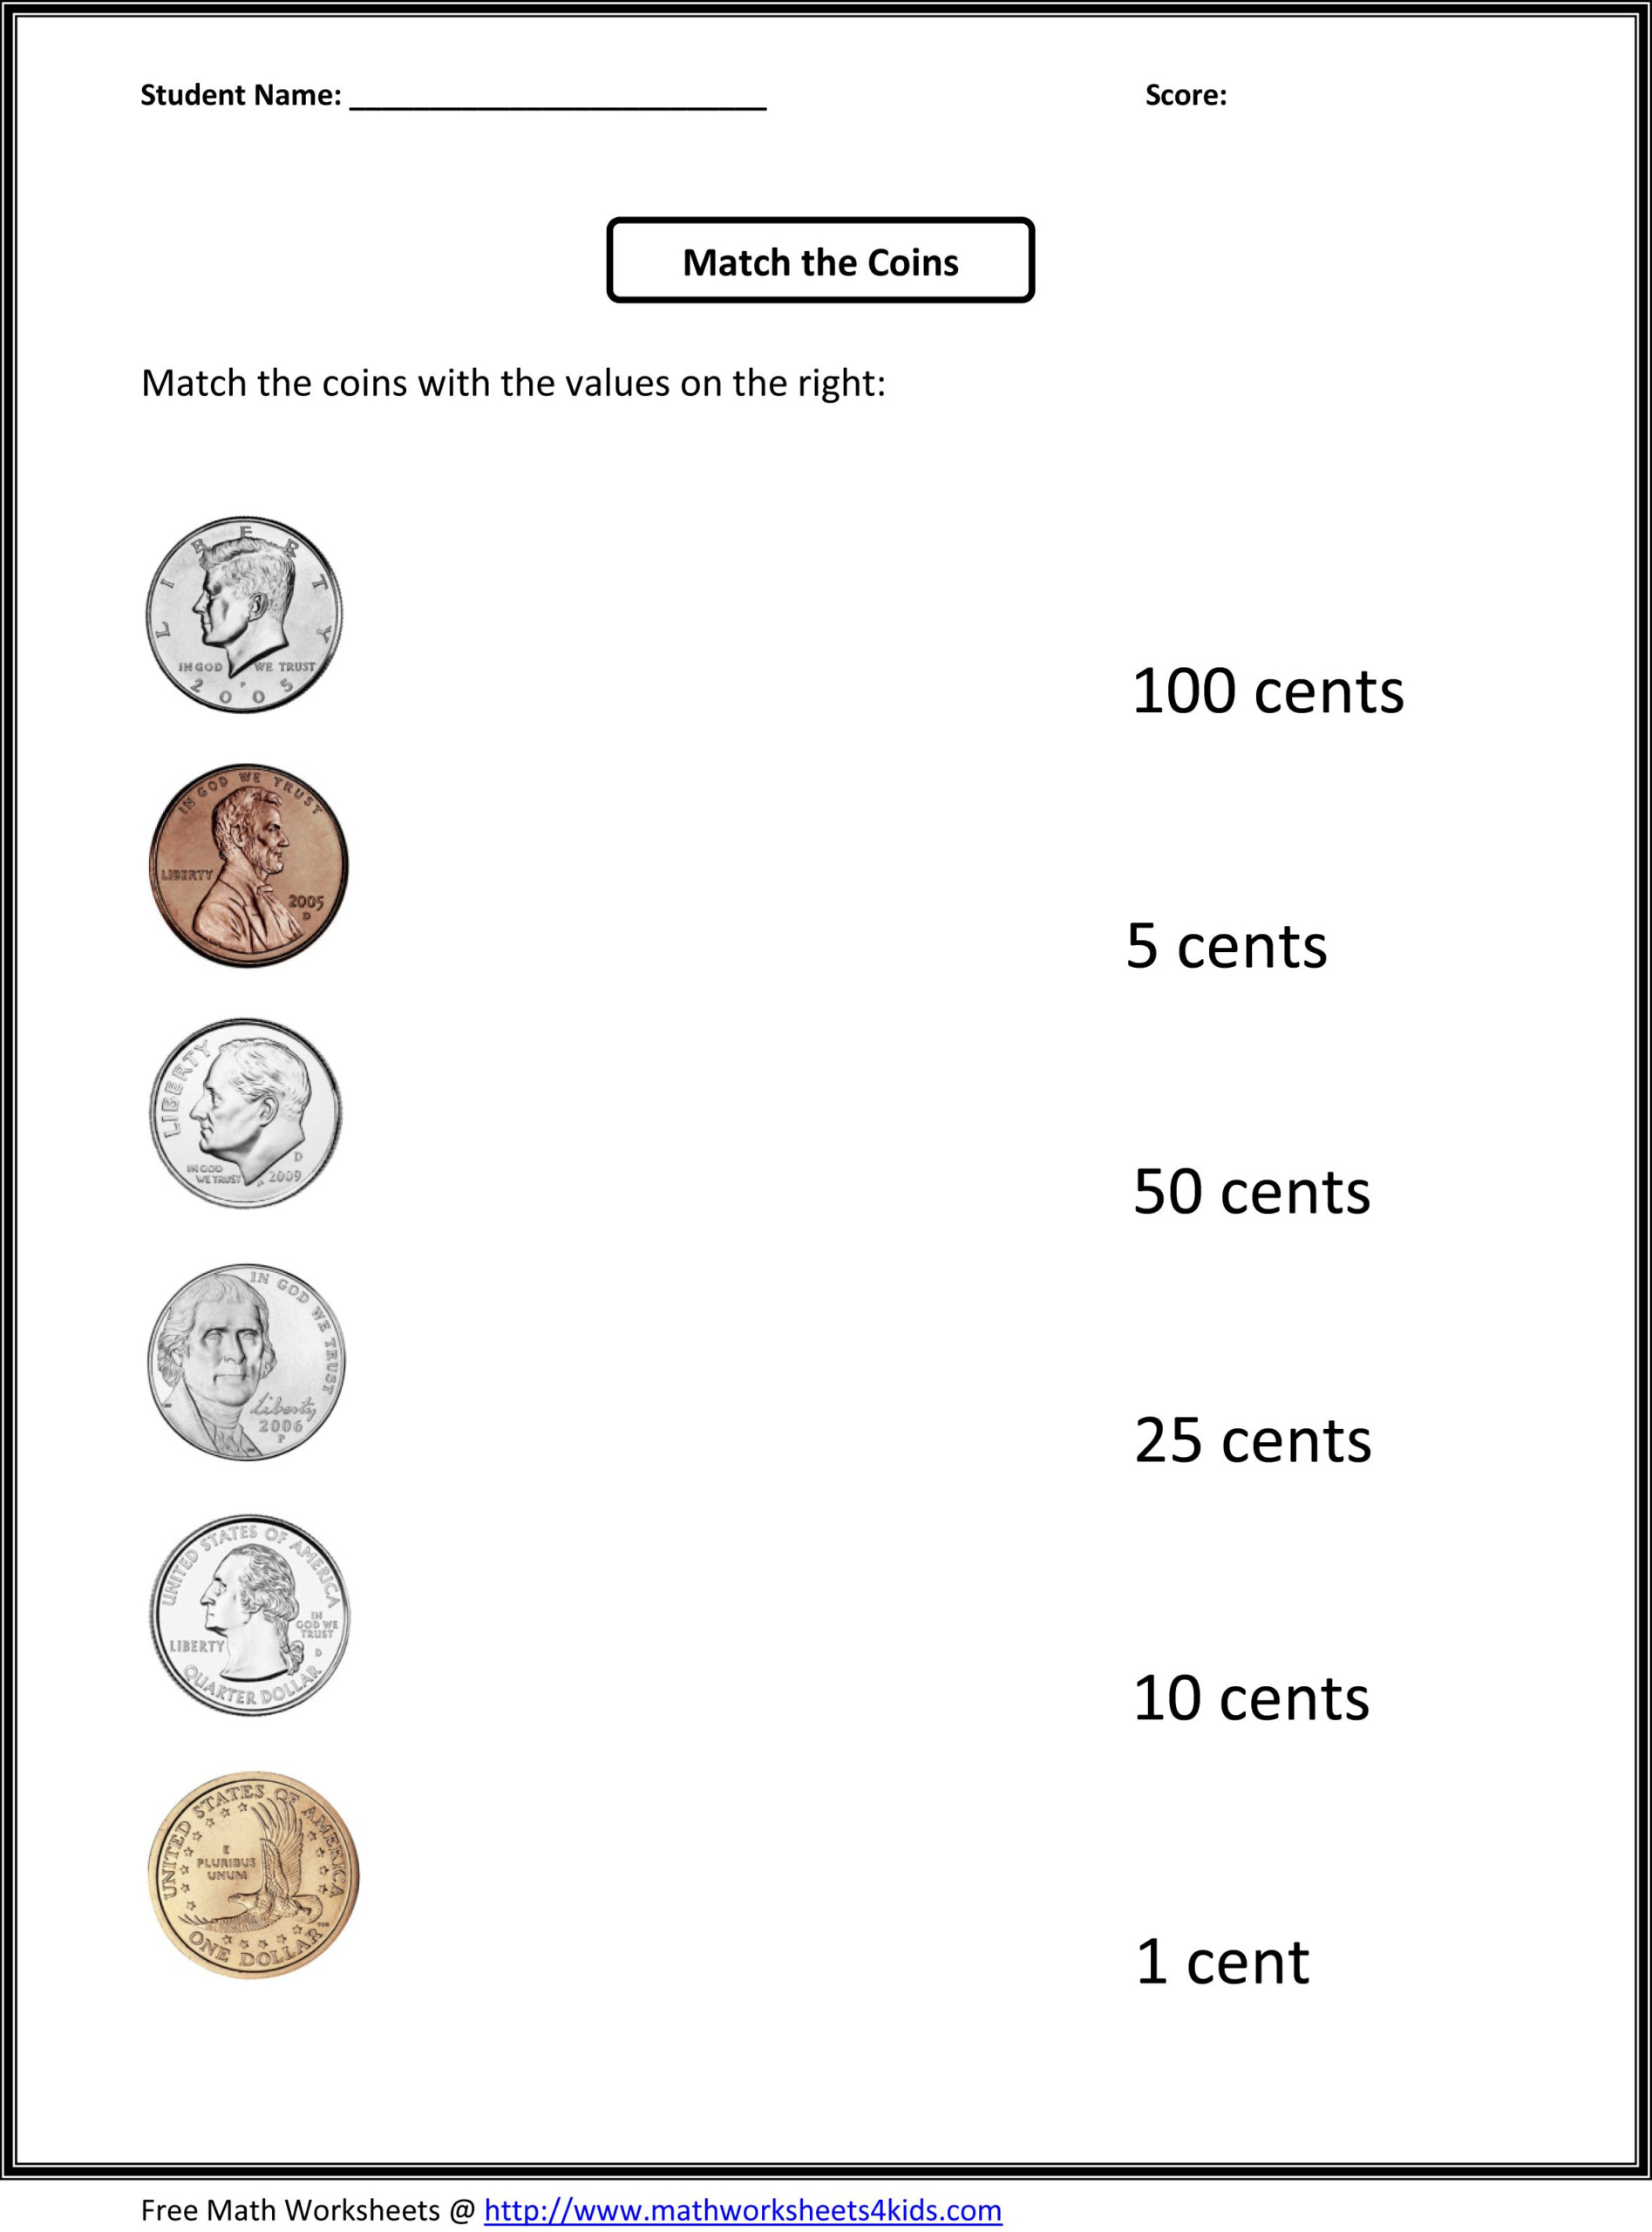 counting-coins-worksheets-free-first-grade-countingworksheets